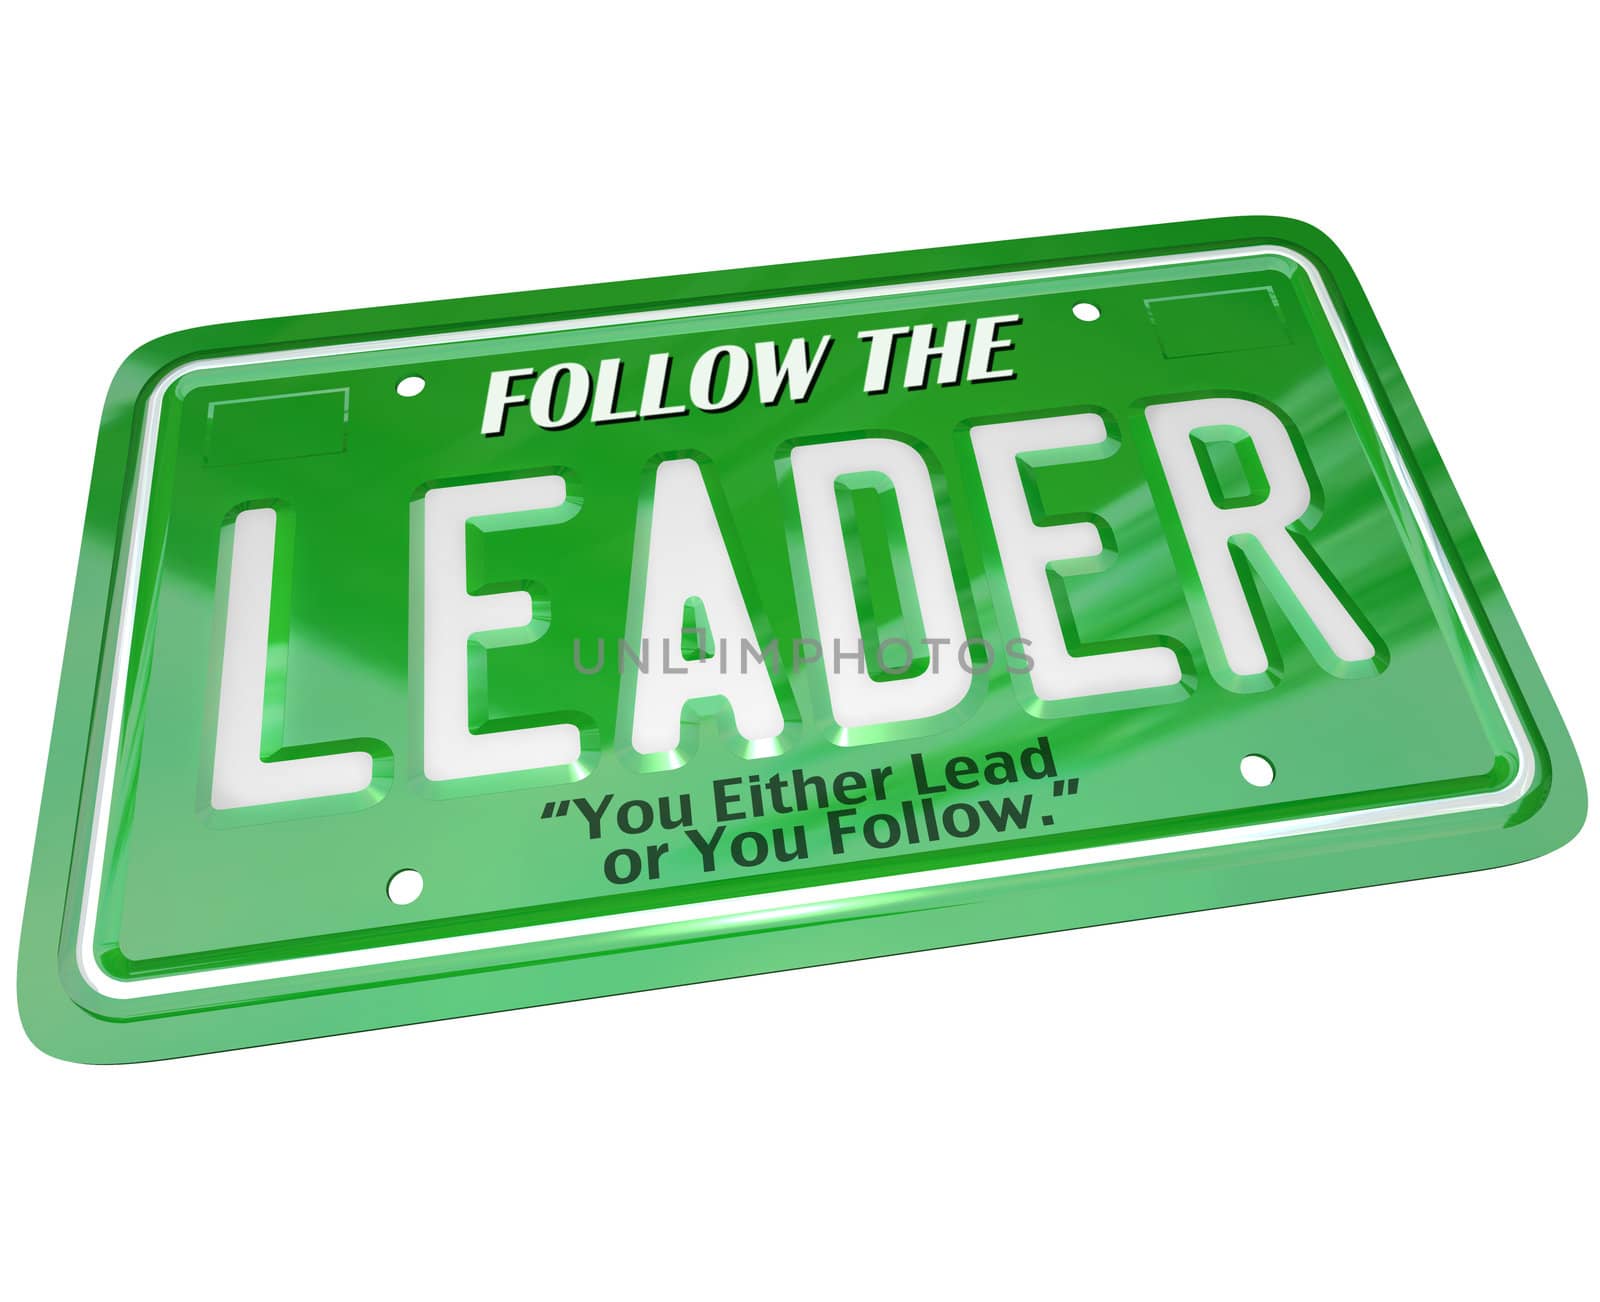 Leader - License Plate Word Leadership Top Manager by iQoncept